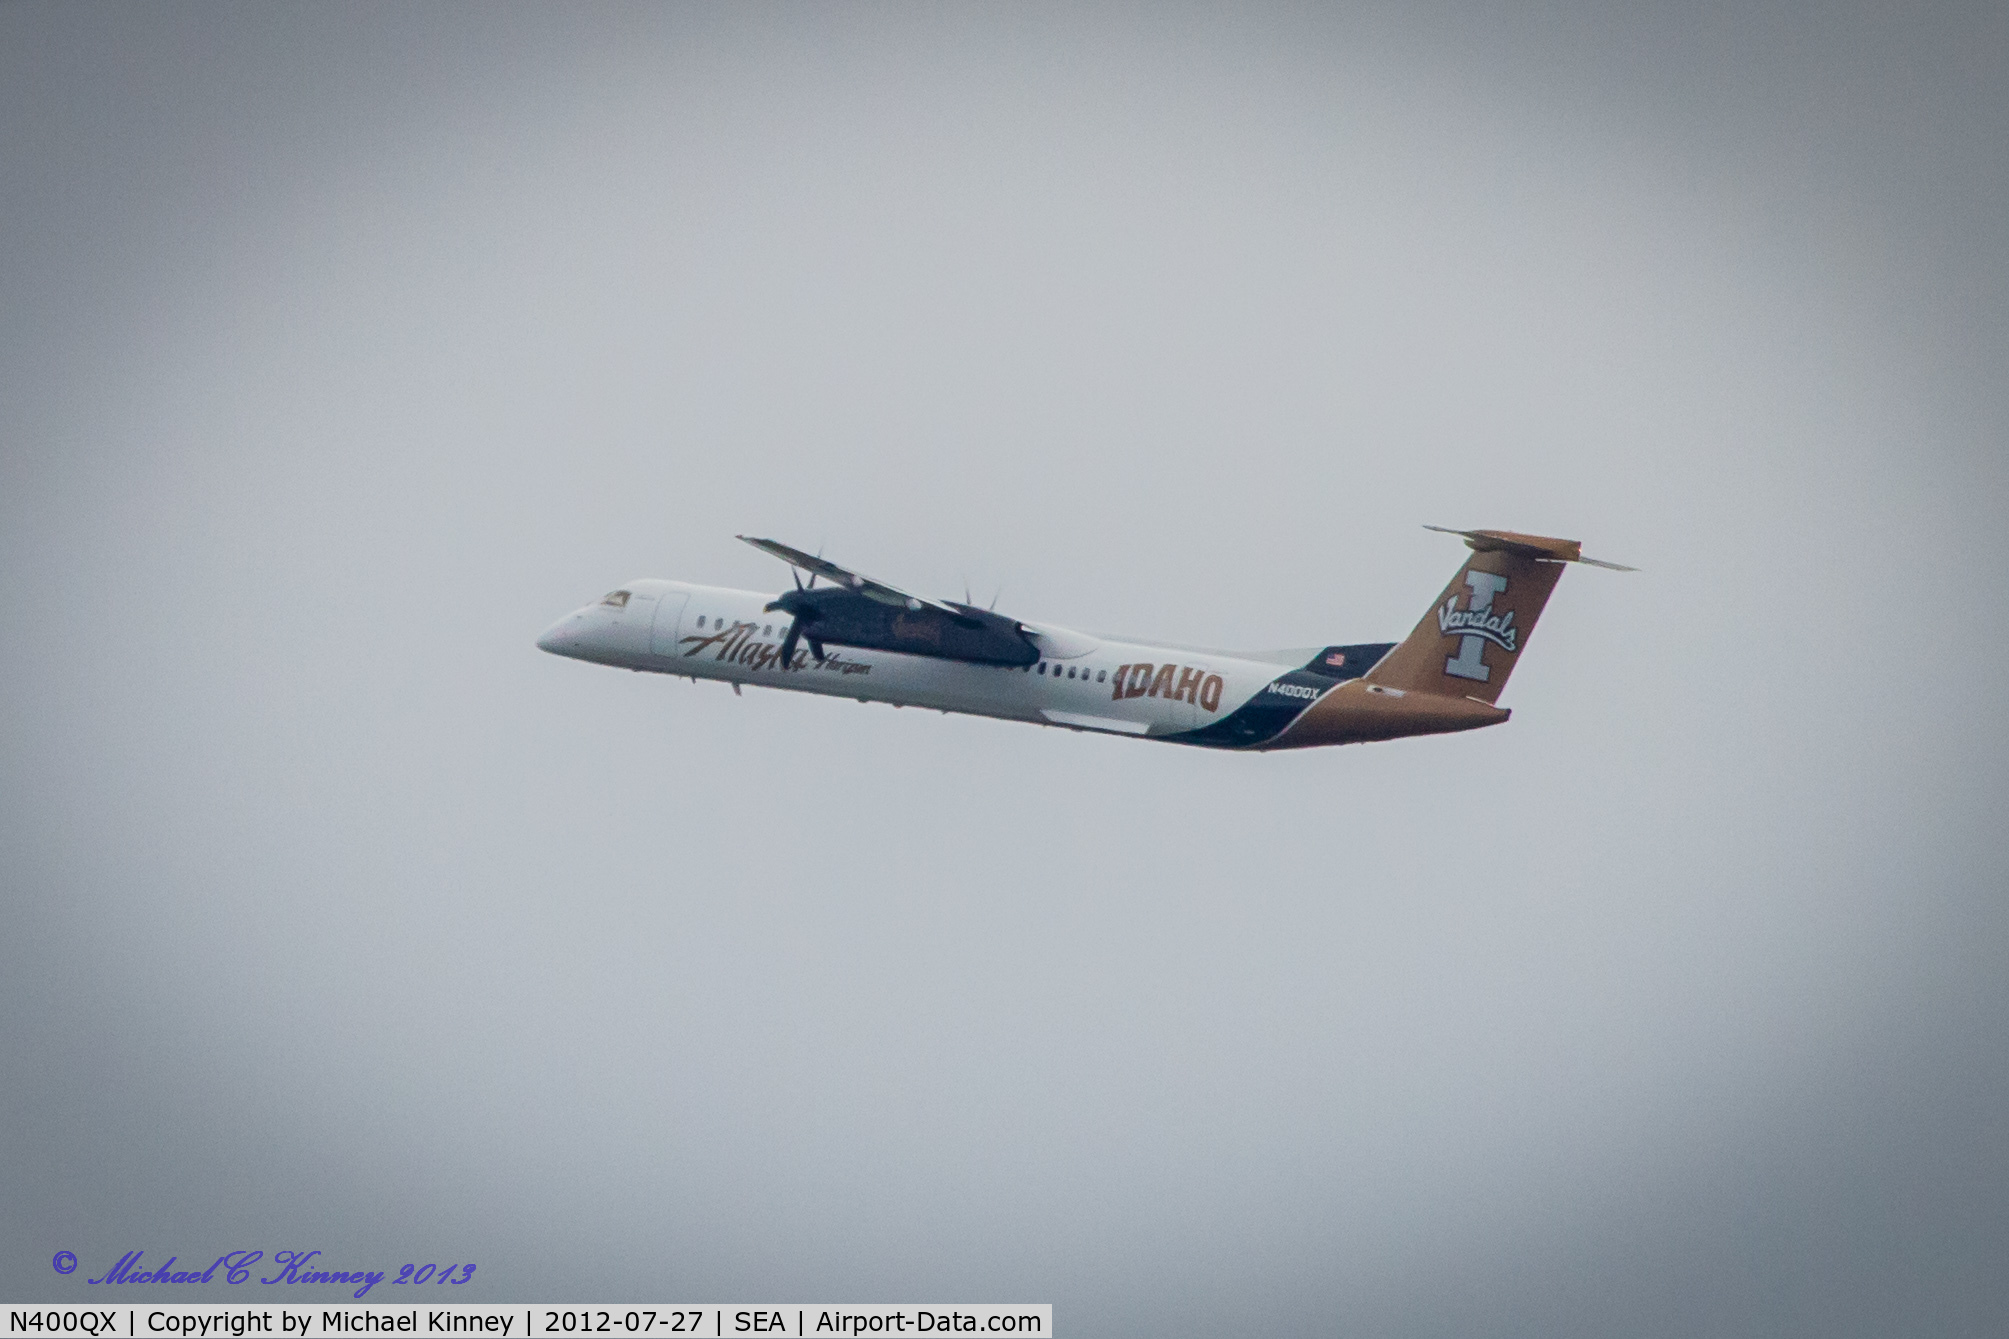 N400QX, 2000 Bombardier DHC-8-402 Dash 8 C/N 4030, After take off